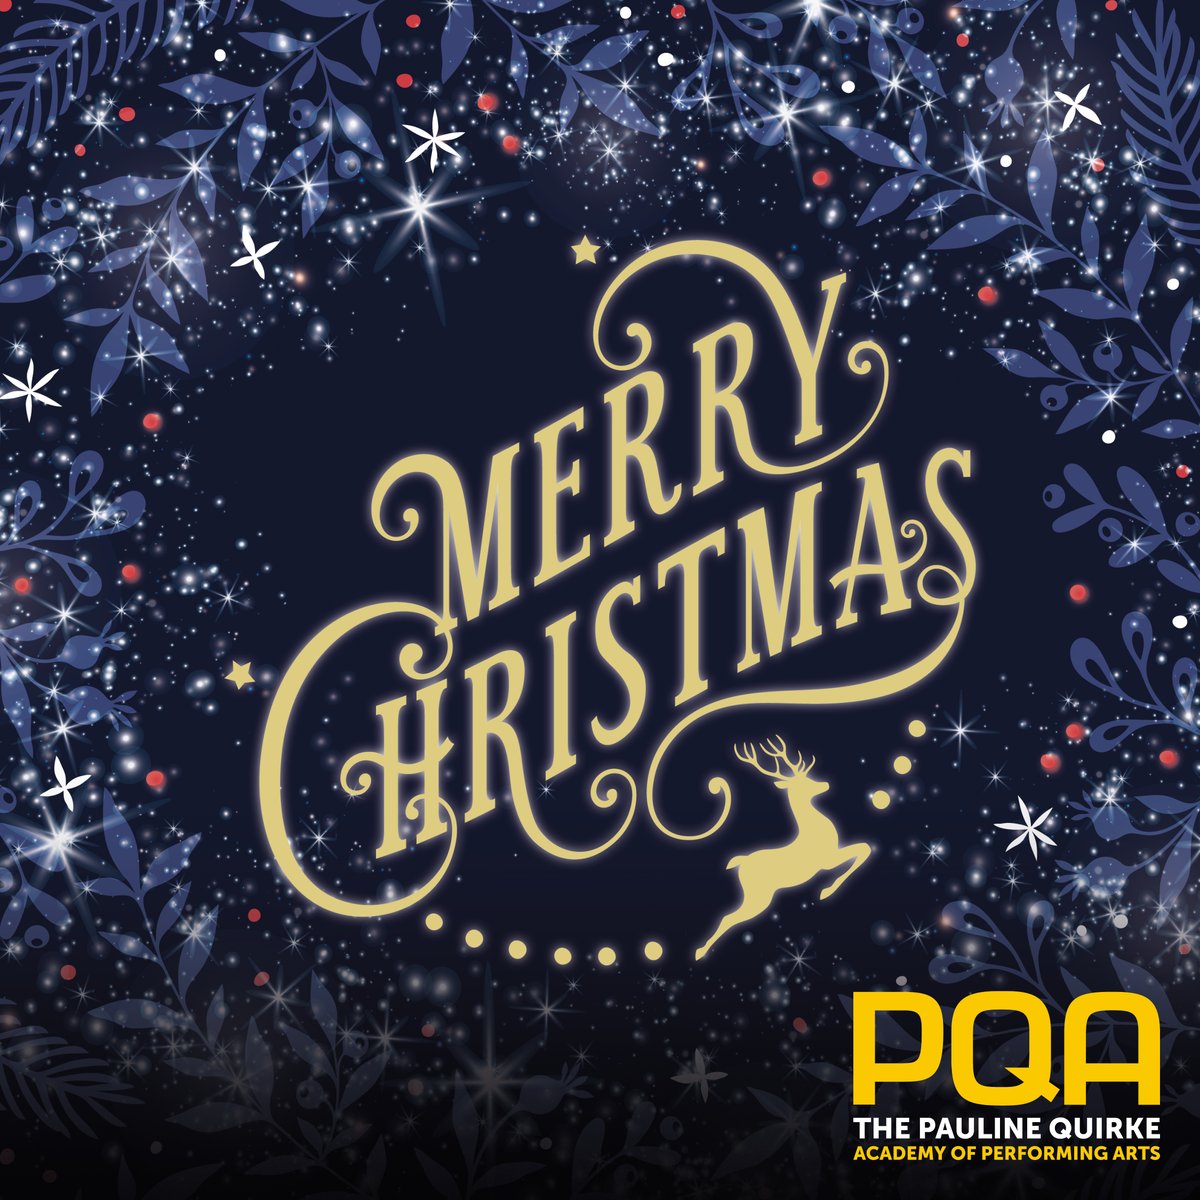 🎄 MERRY CHRISTMAS PQA'ERS! 🎄 We hope you have a wonderful Christmas with all the delicious food and quality time with your loved ones ⭐#MerryChristmas 🎅